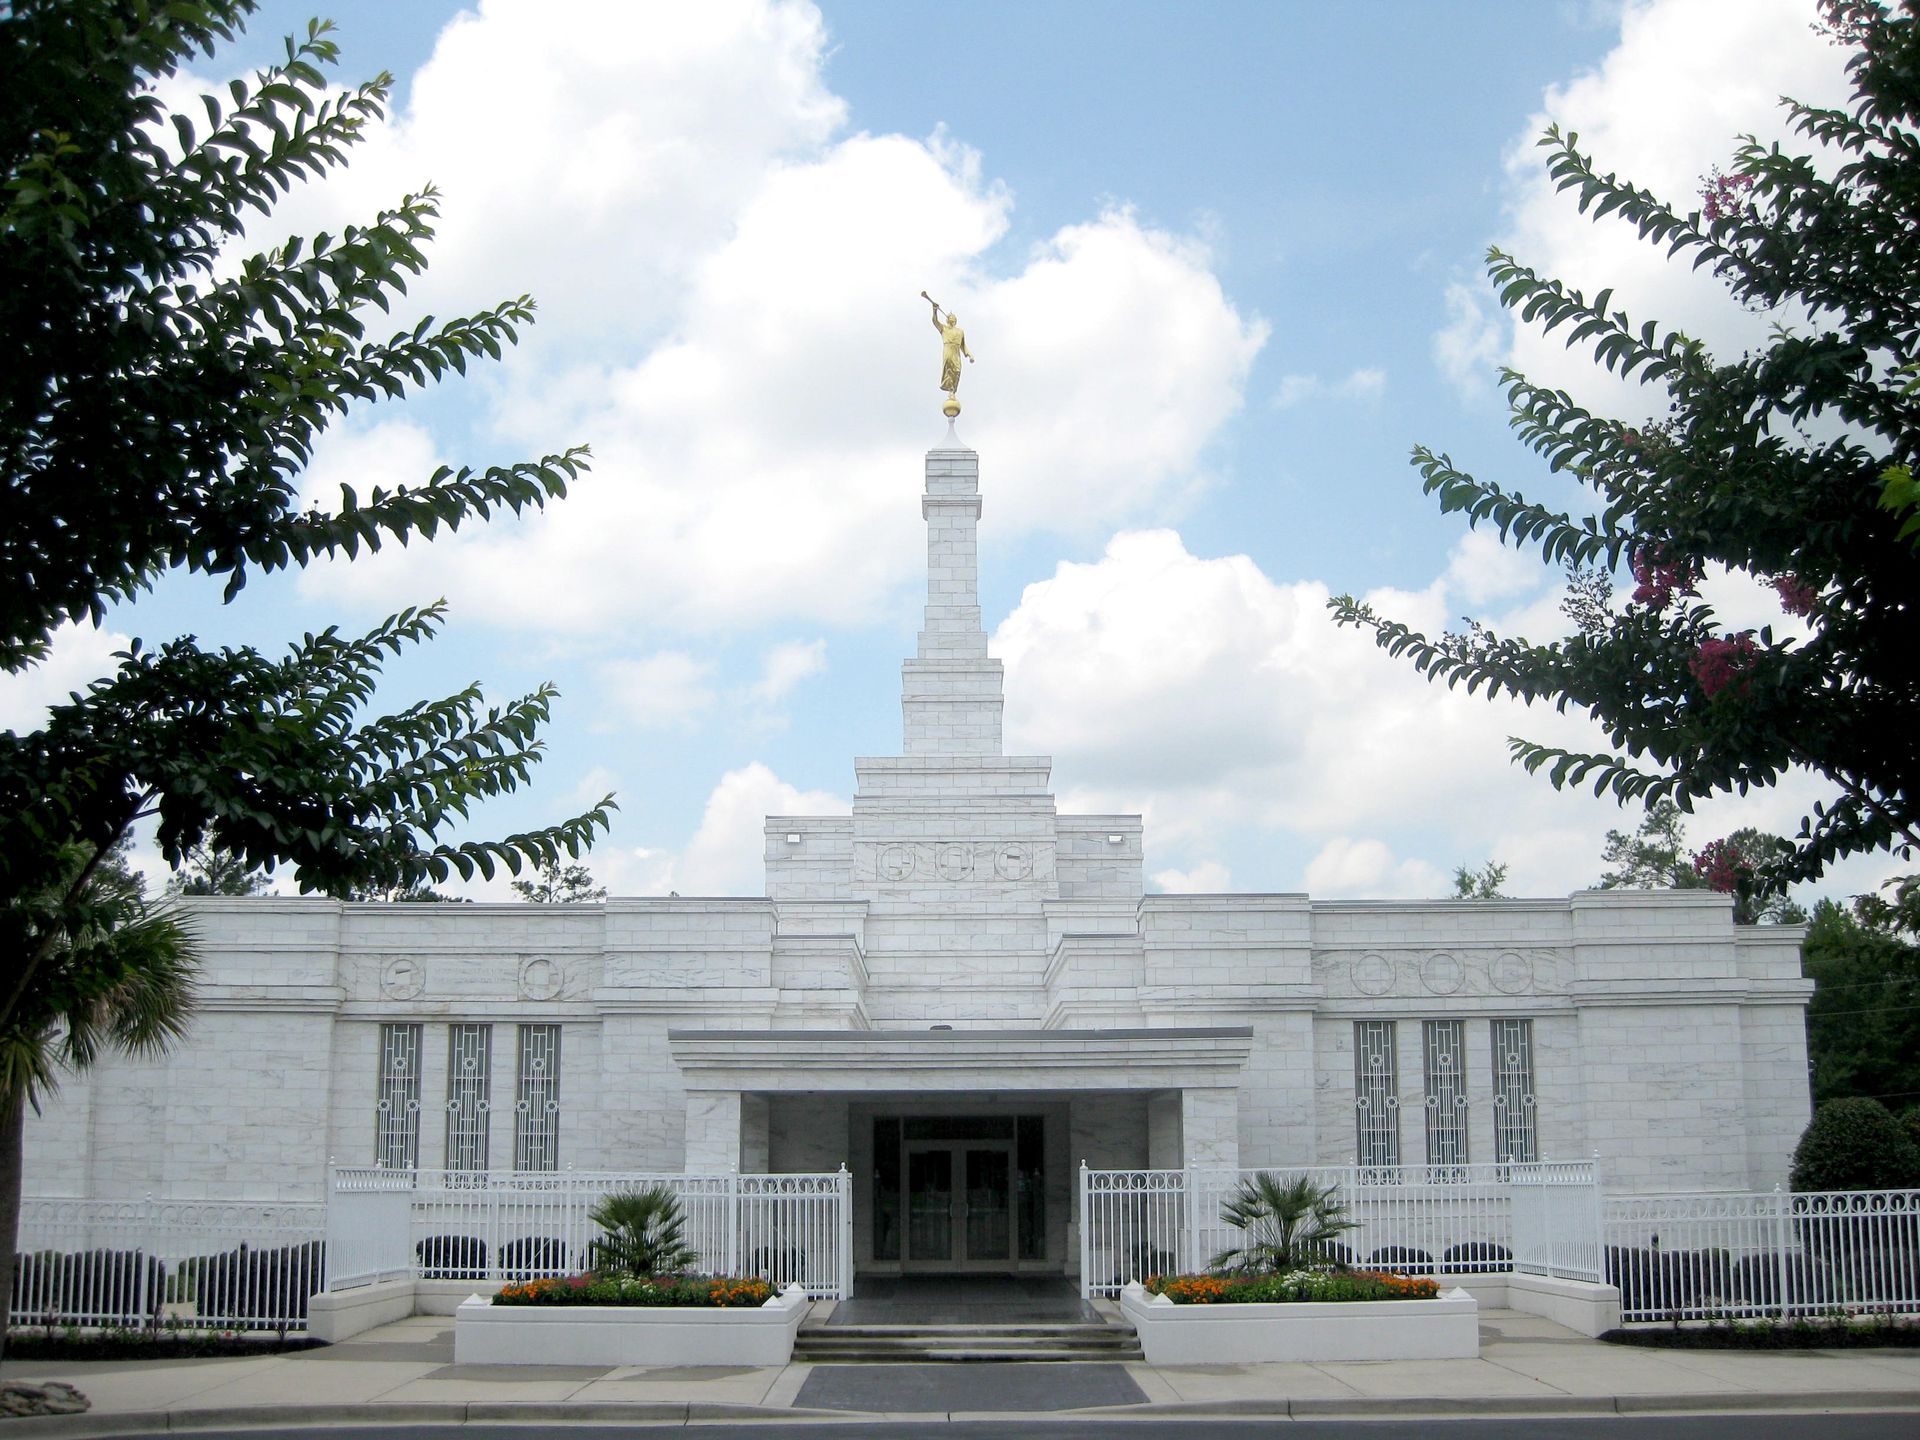 A view of the entrance to the Columbia South Carolina Temple.